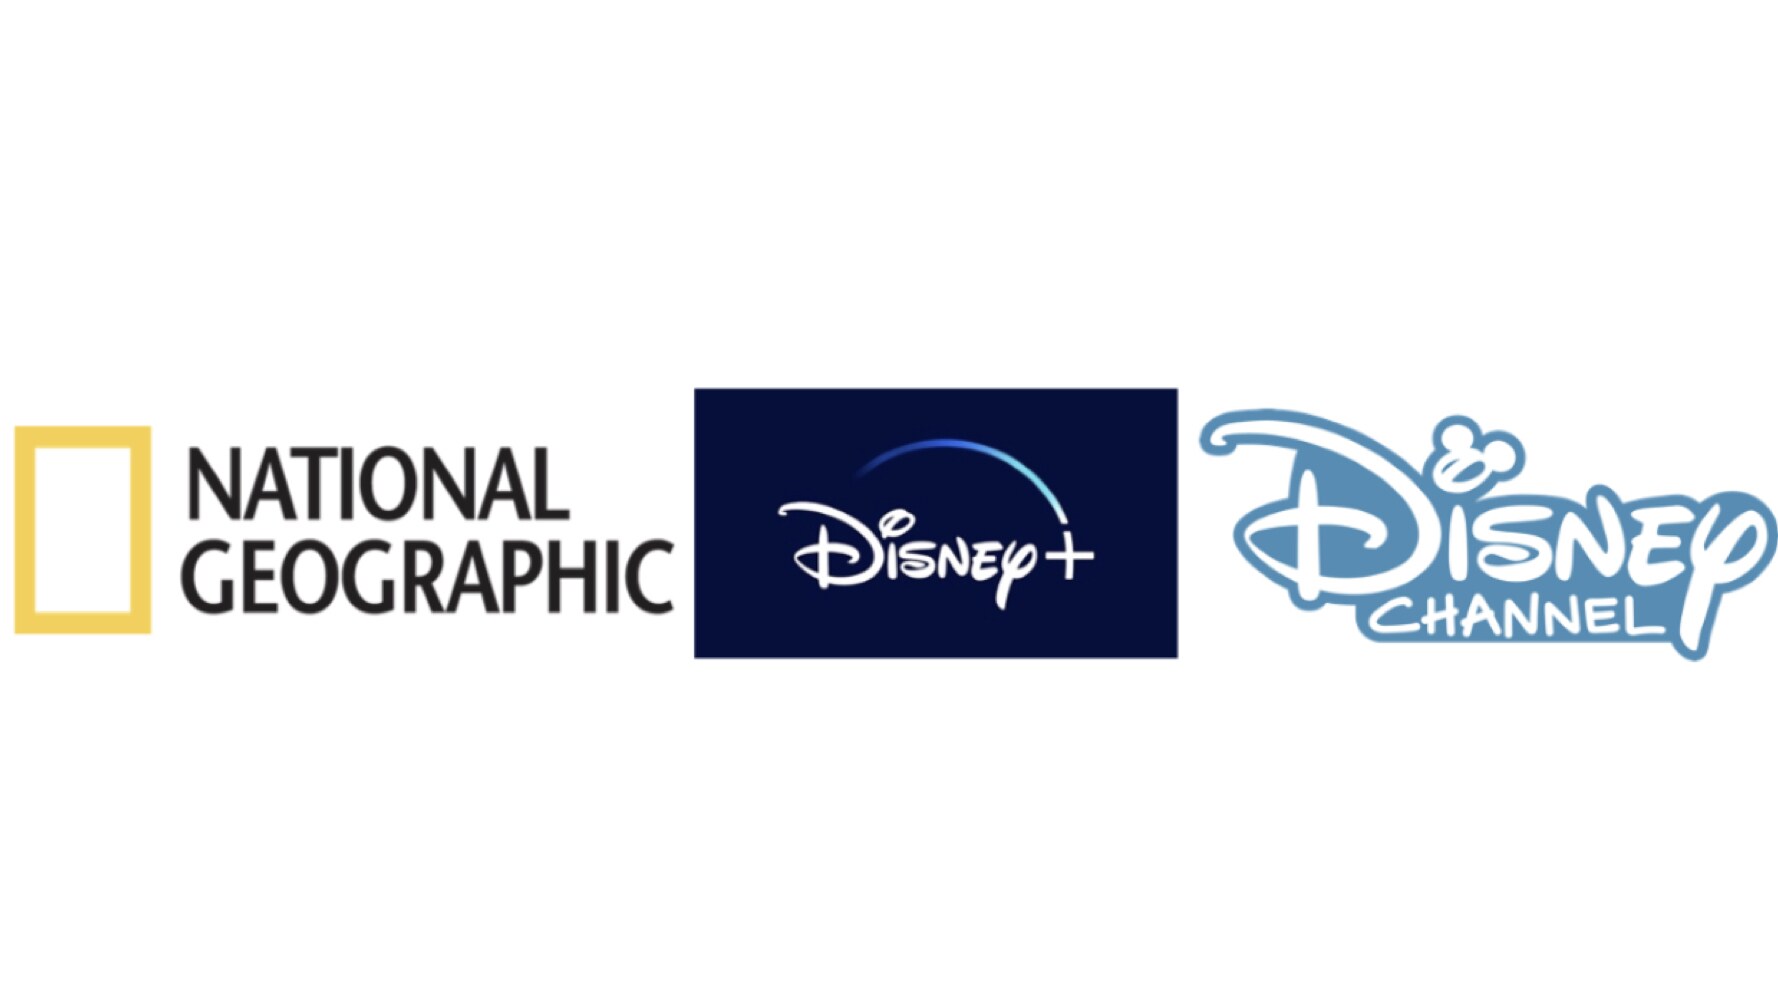 Disney+, Disney Channel And National Geographic Content Take The Stage At The Winter 2023 TCA Press Tour With A Robust Slate Of Premiere Dates And First Looks